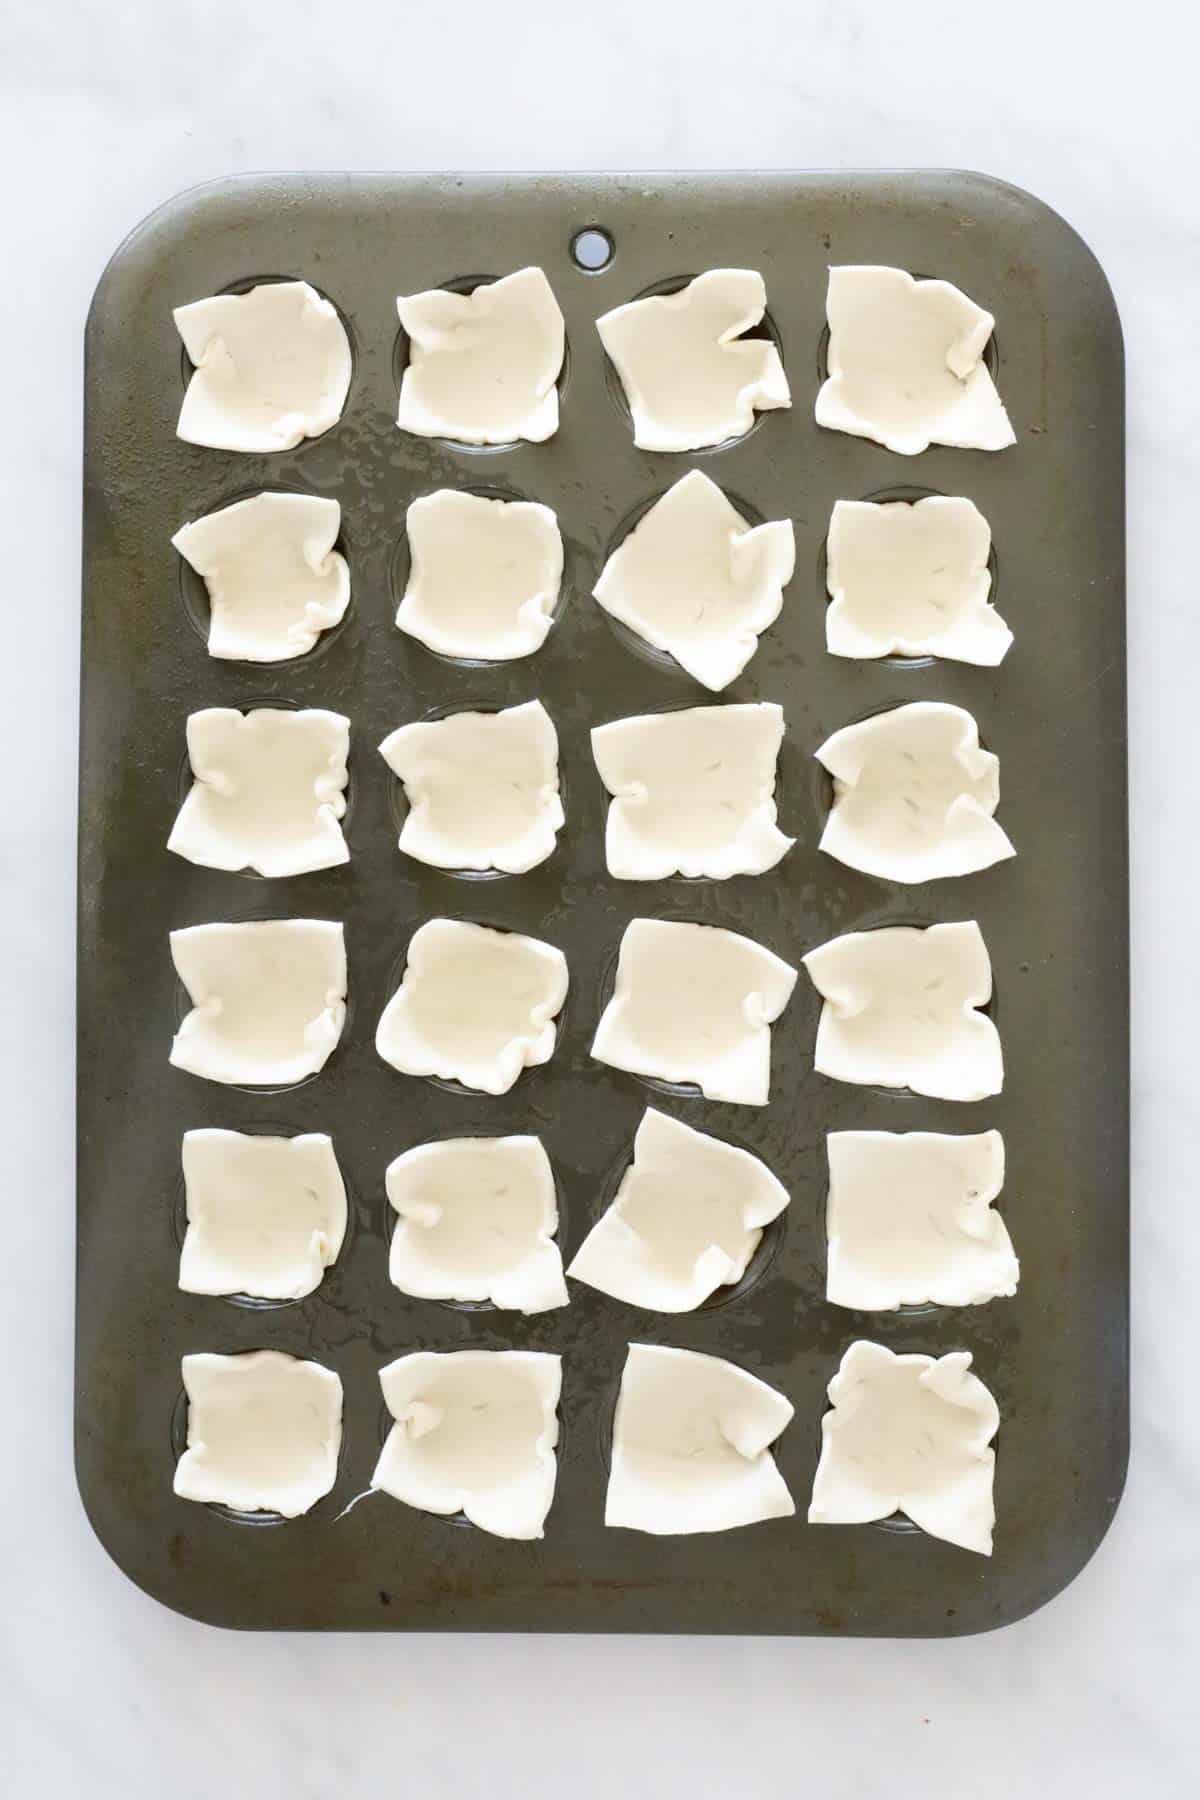 Puff pastry squares pressed into a mini muffin tray.